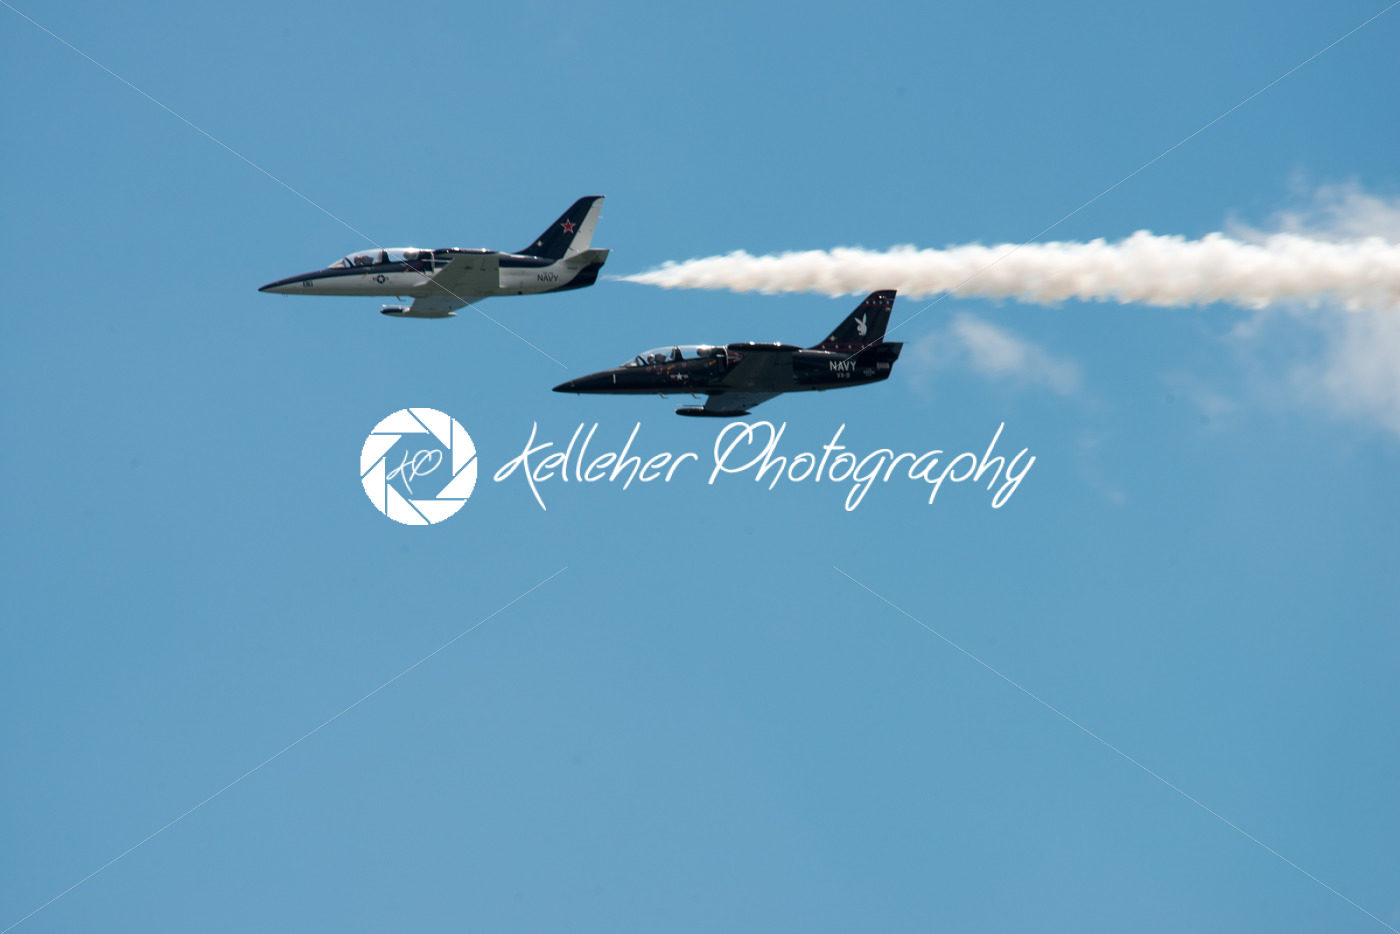 ATLANTIC CITY, NJ – AUGUST 17: Navy Jet at Annual Atlantic City Air Show on August 17, 2016 - Kelleher Photography Store